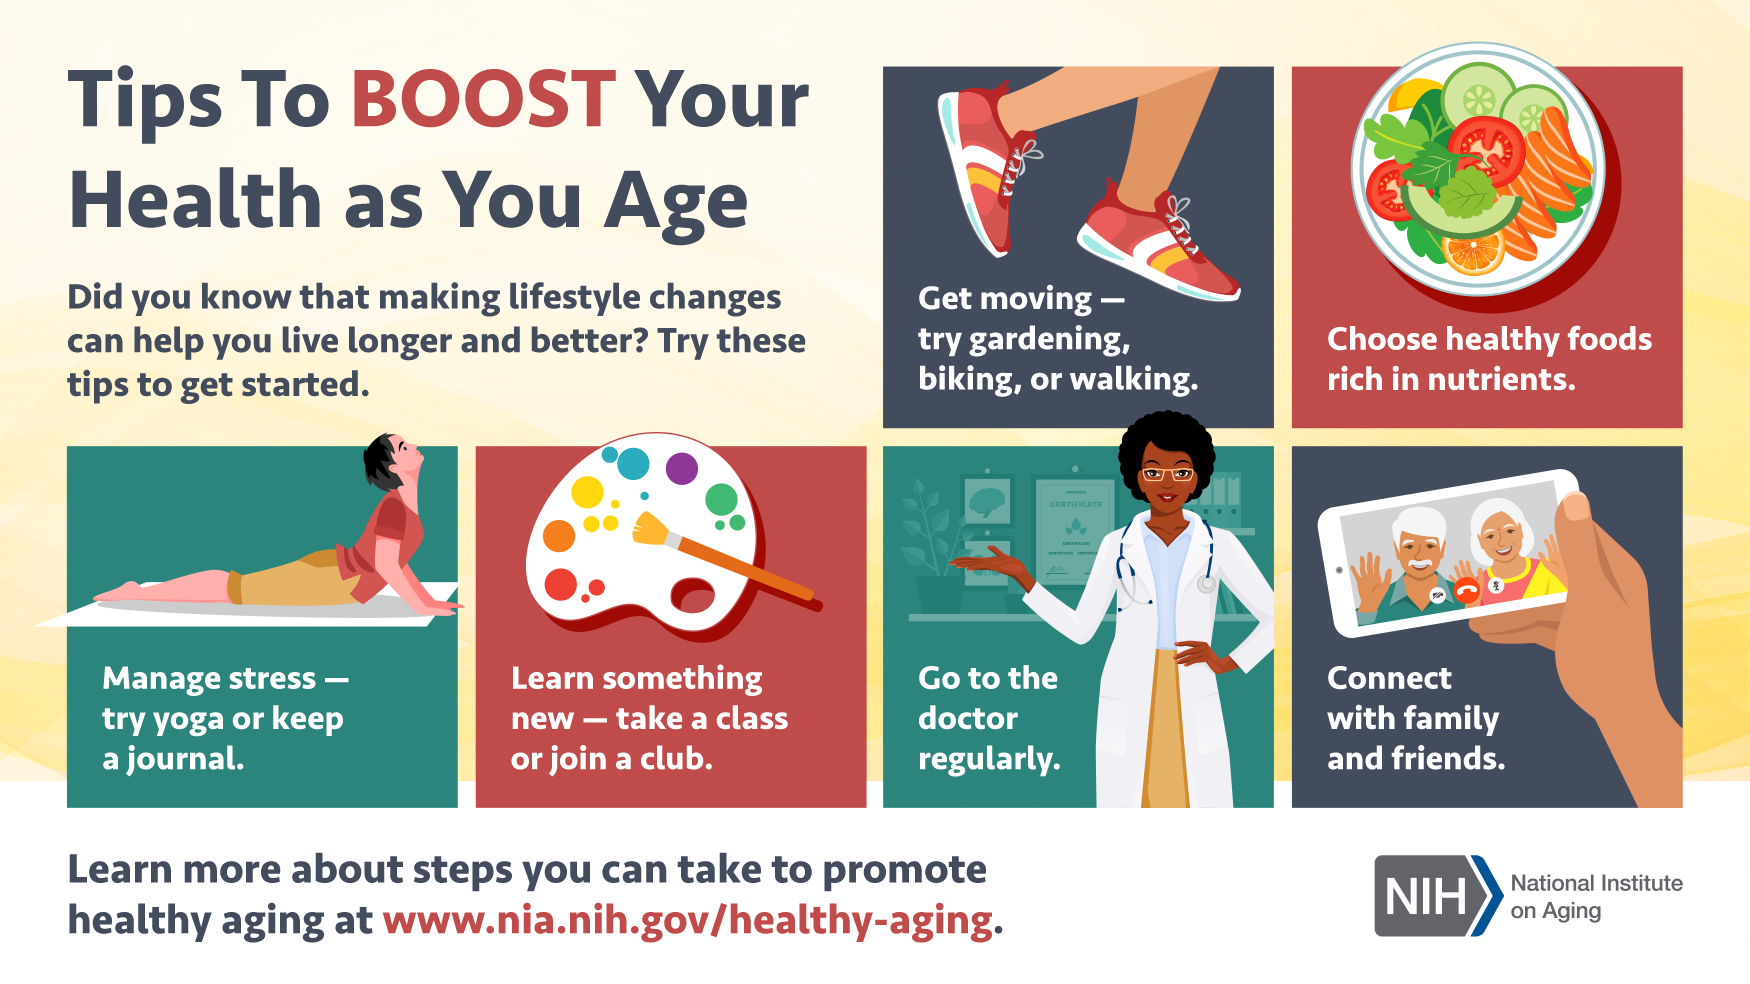 Tips to boost your health as you age